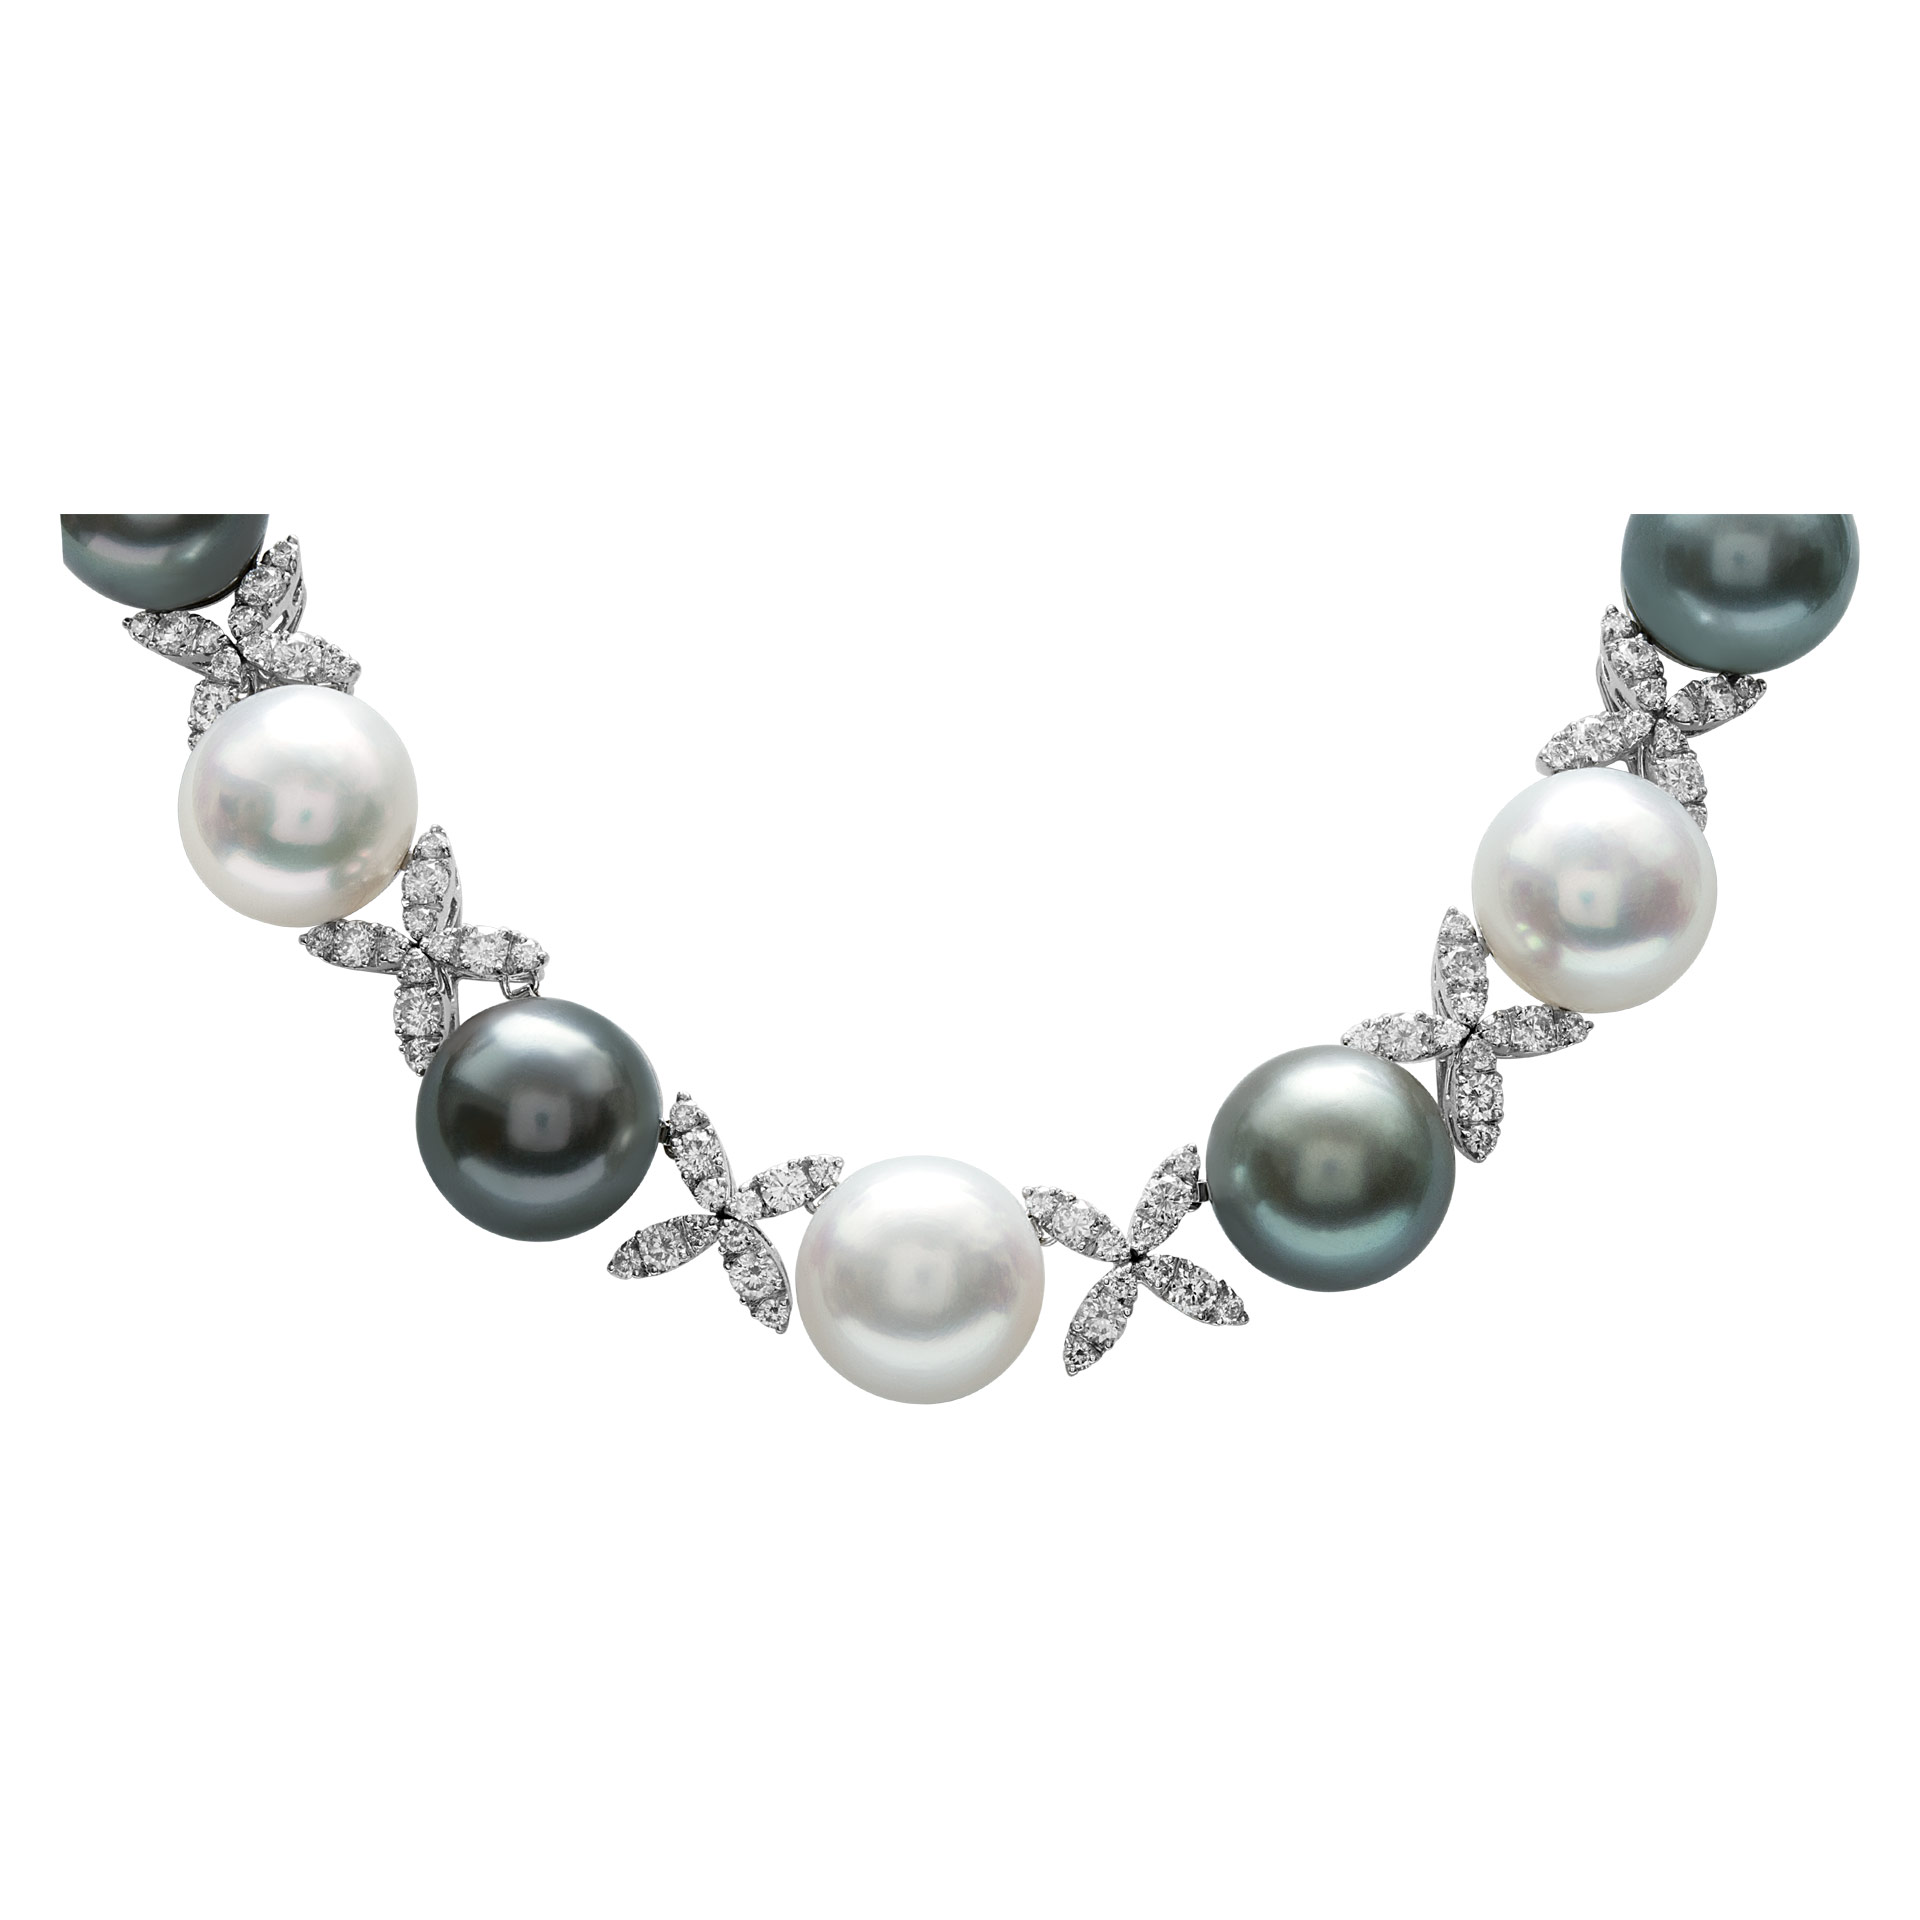 Pearl and diamond necklace with 11.91 cts in diamonds.